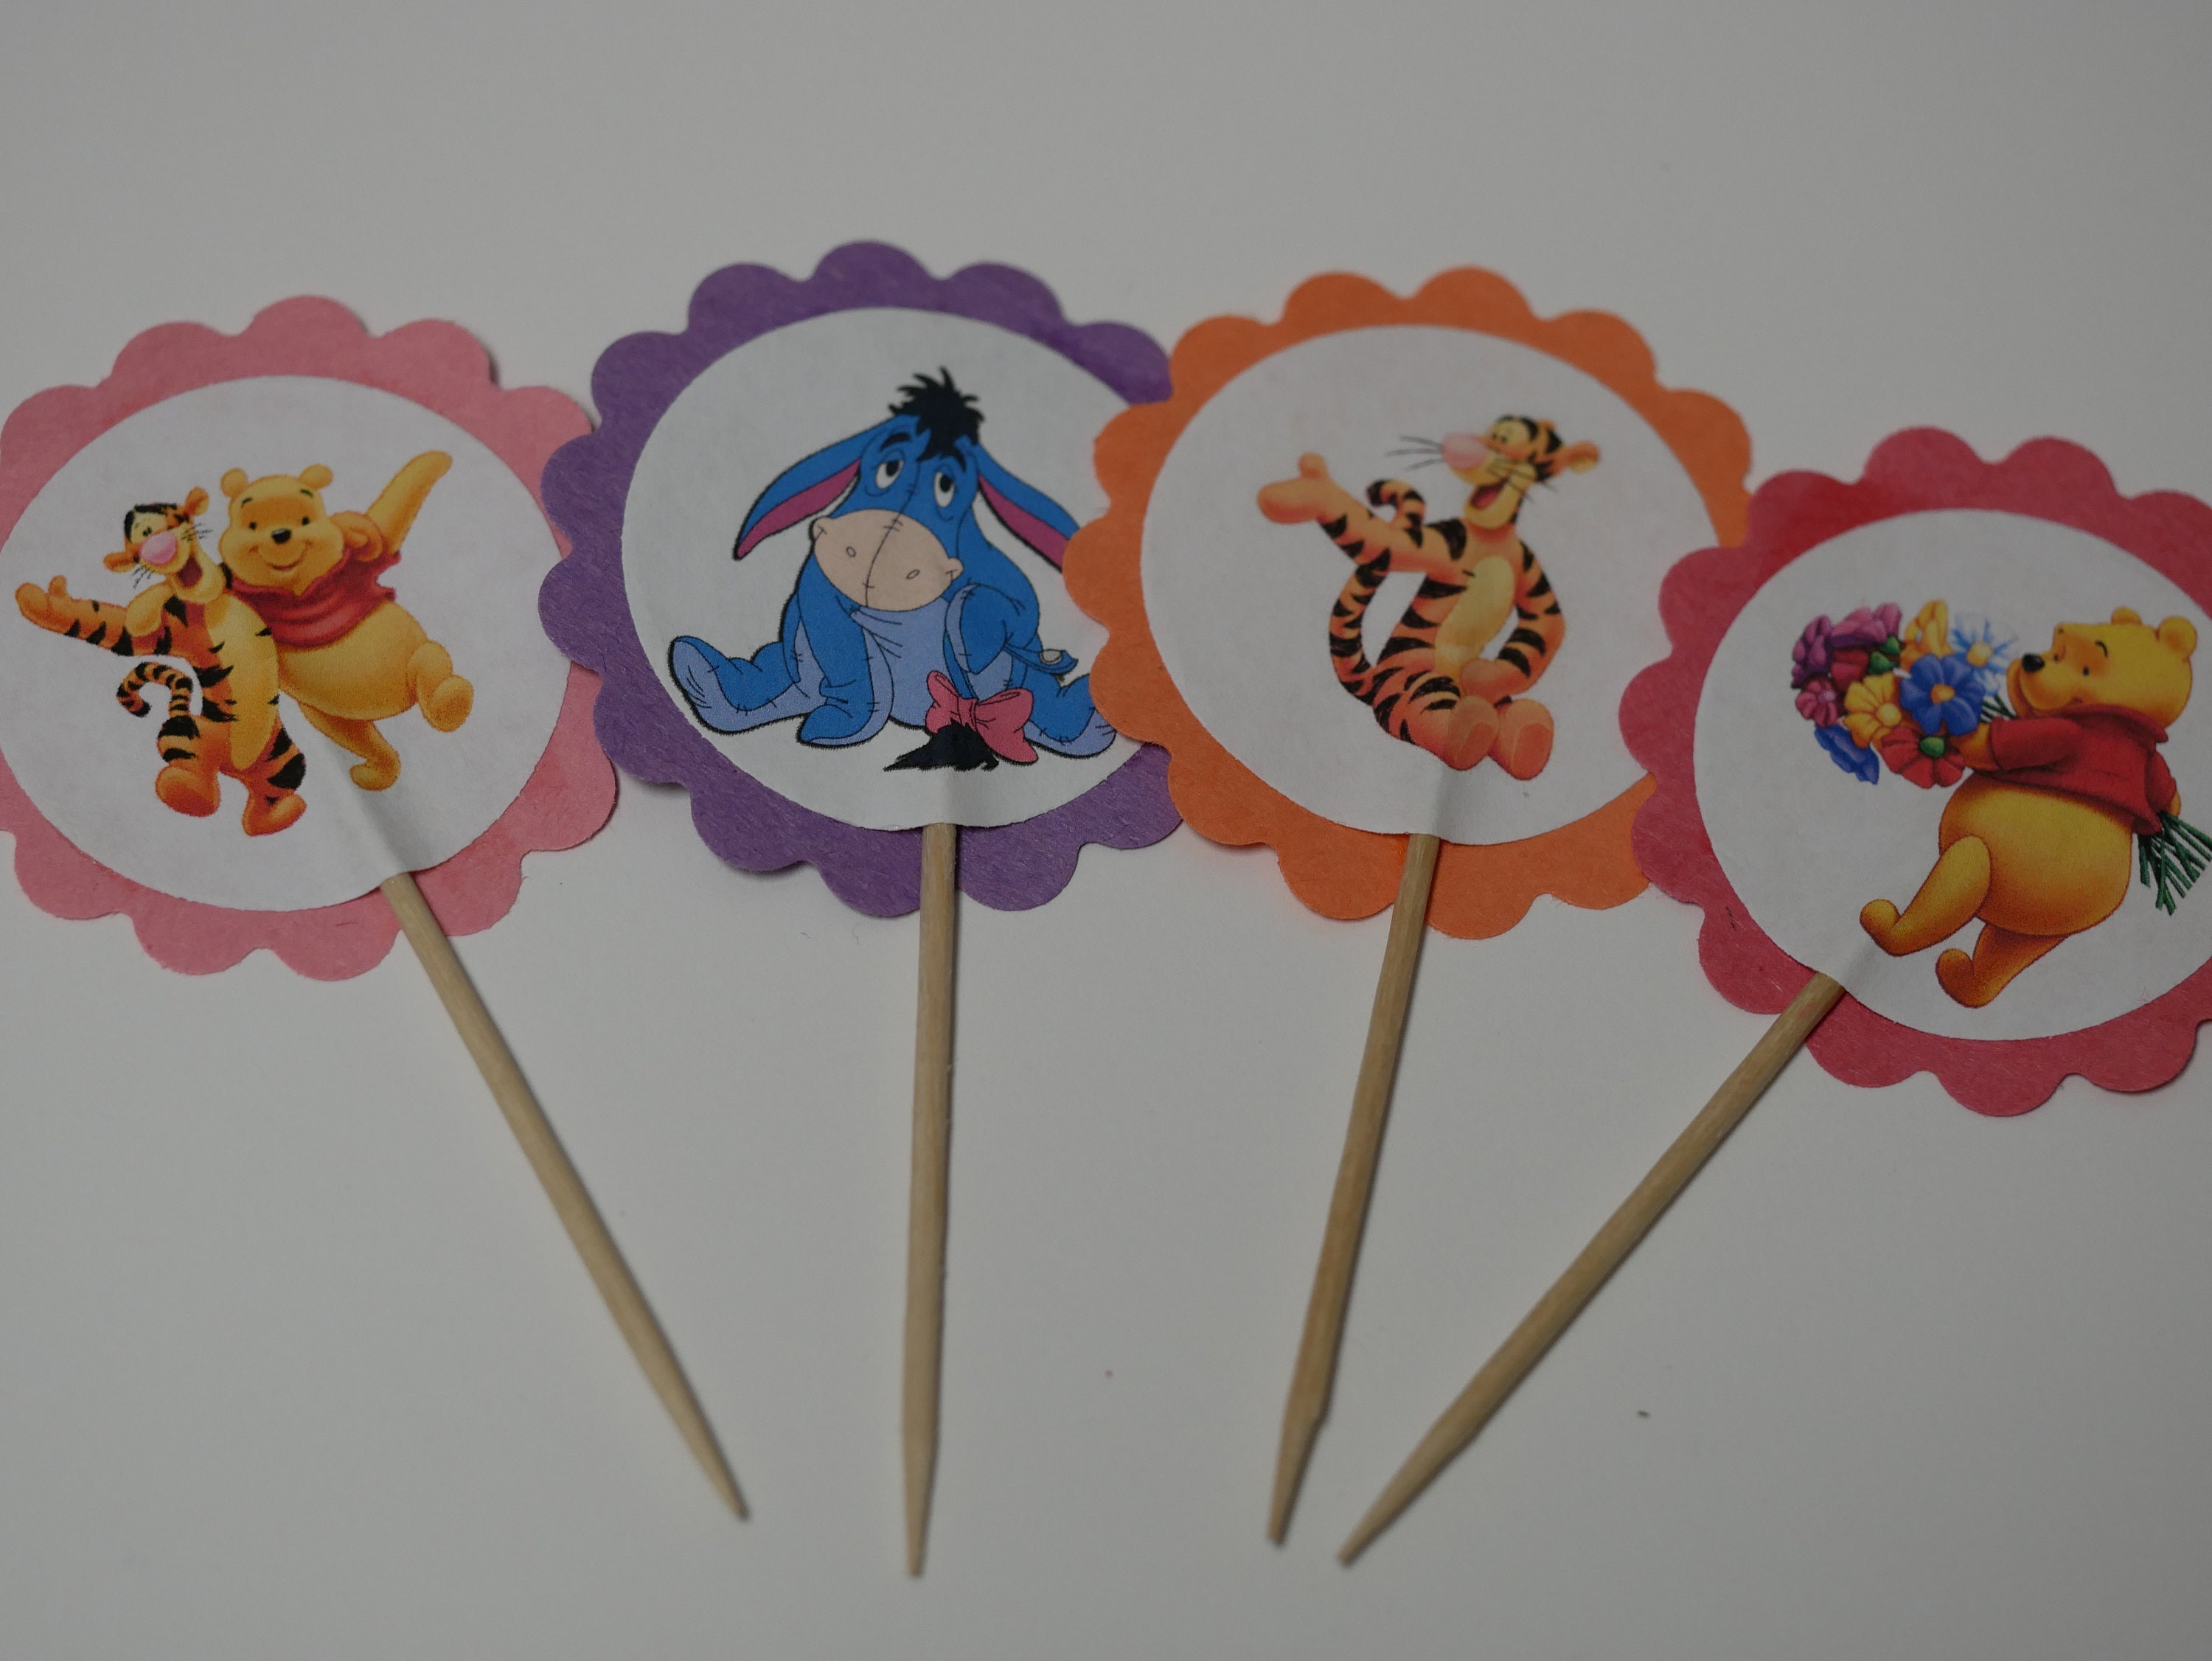  48 Pcs Winnie Baby Shower Cupcake Toppers for Classic